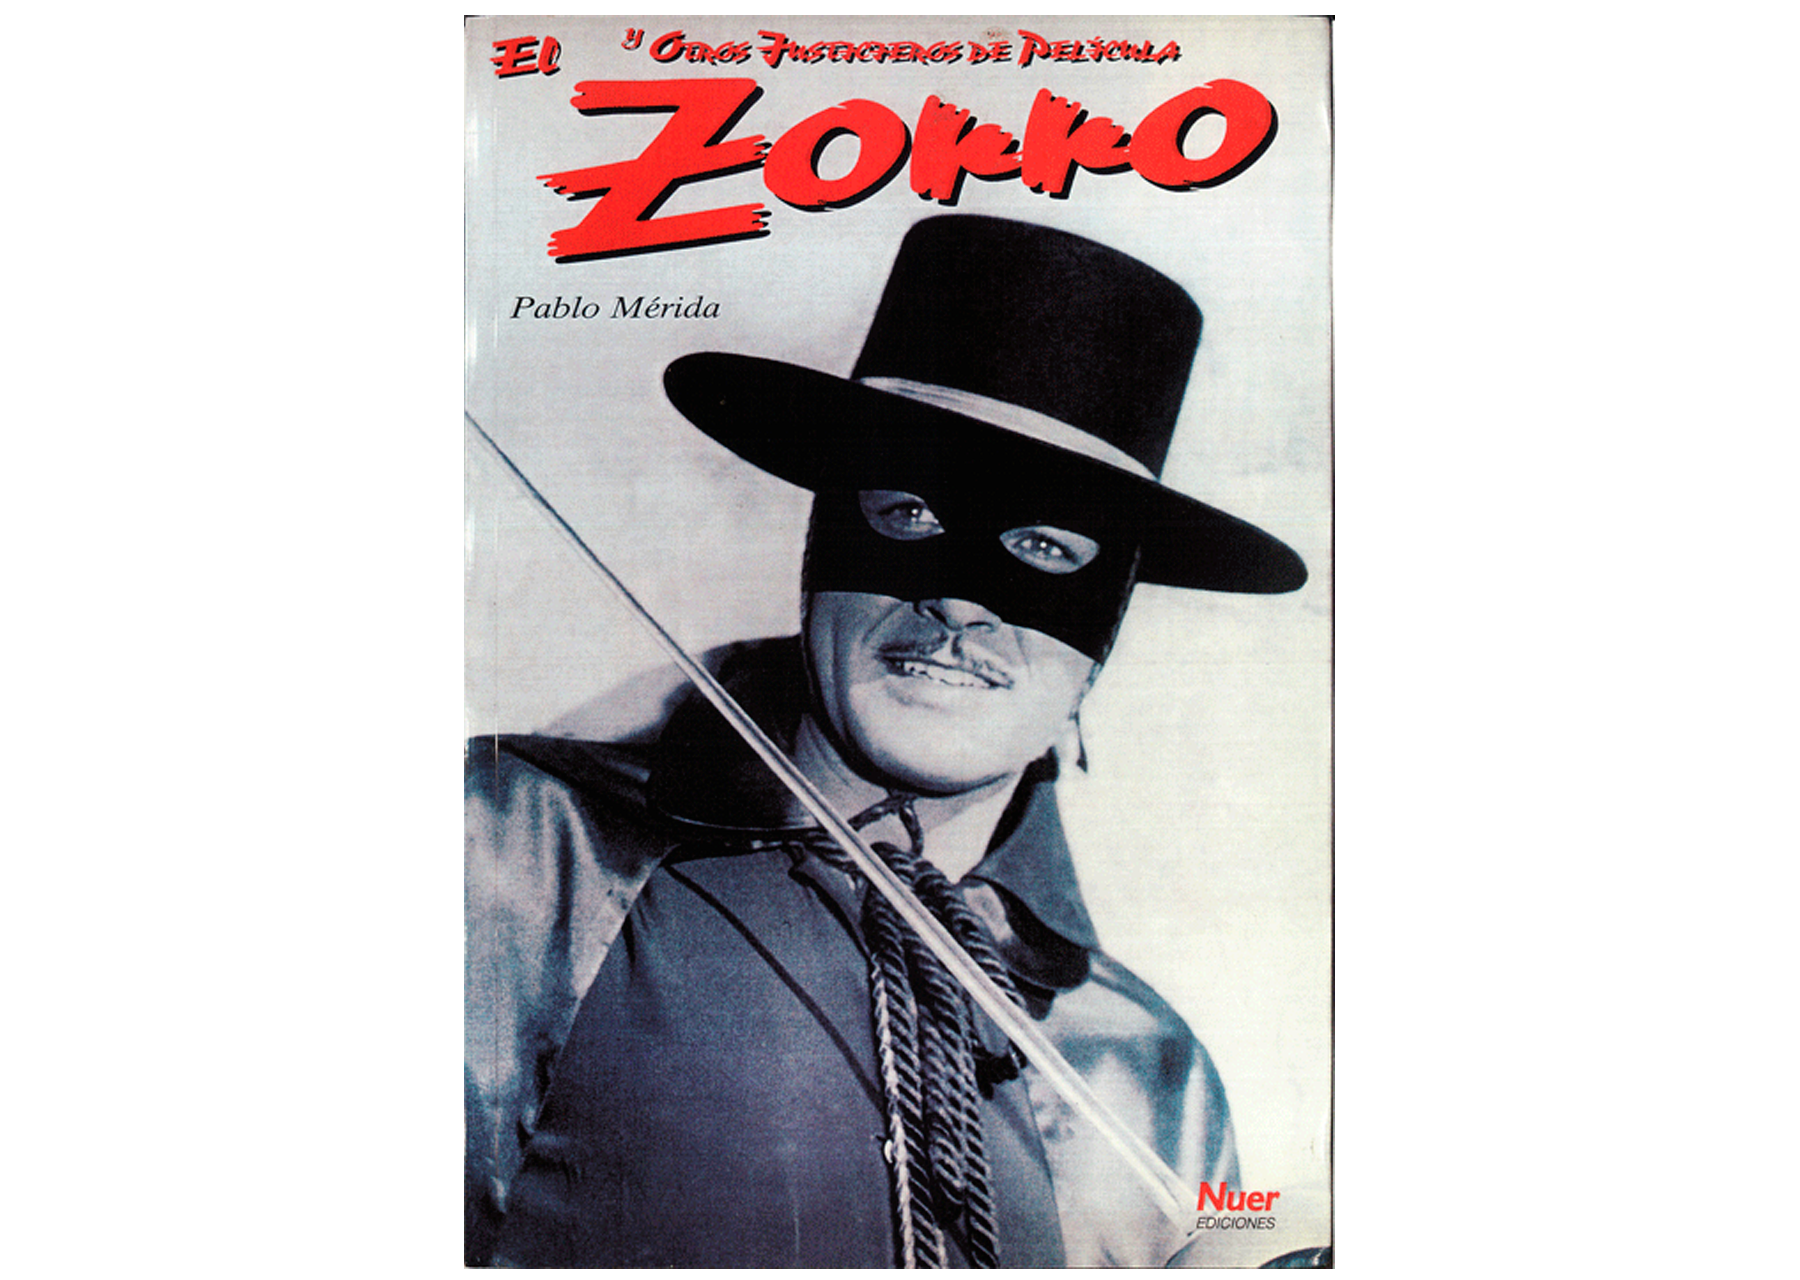 What is Zorro's real name?